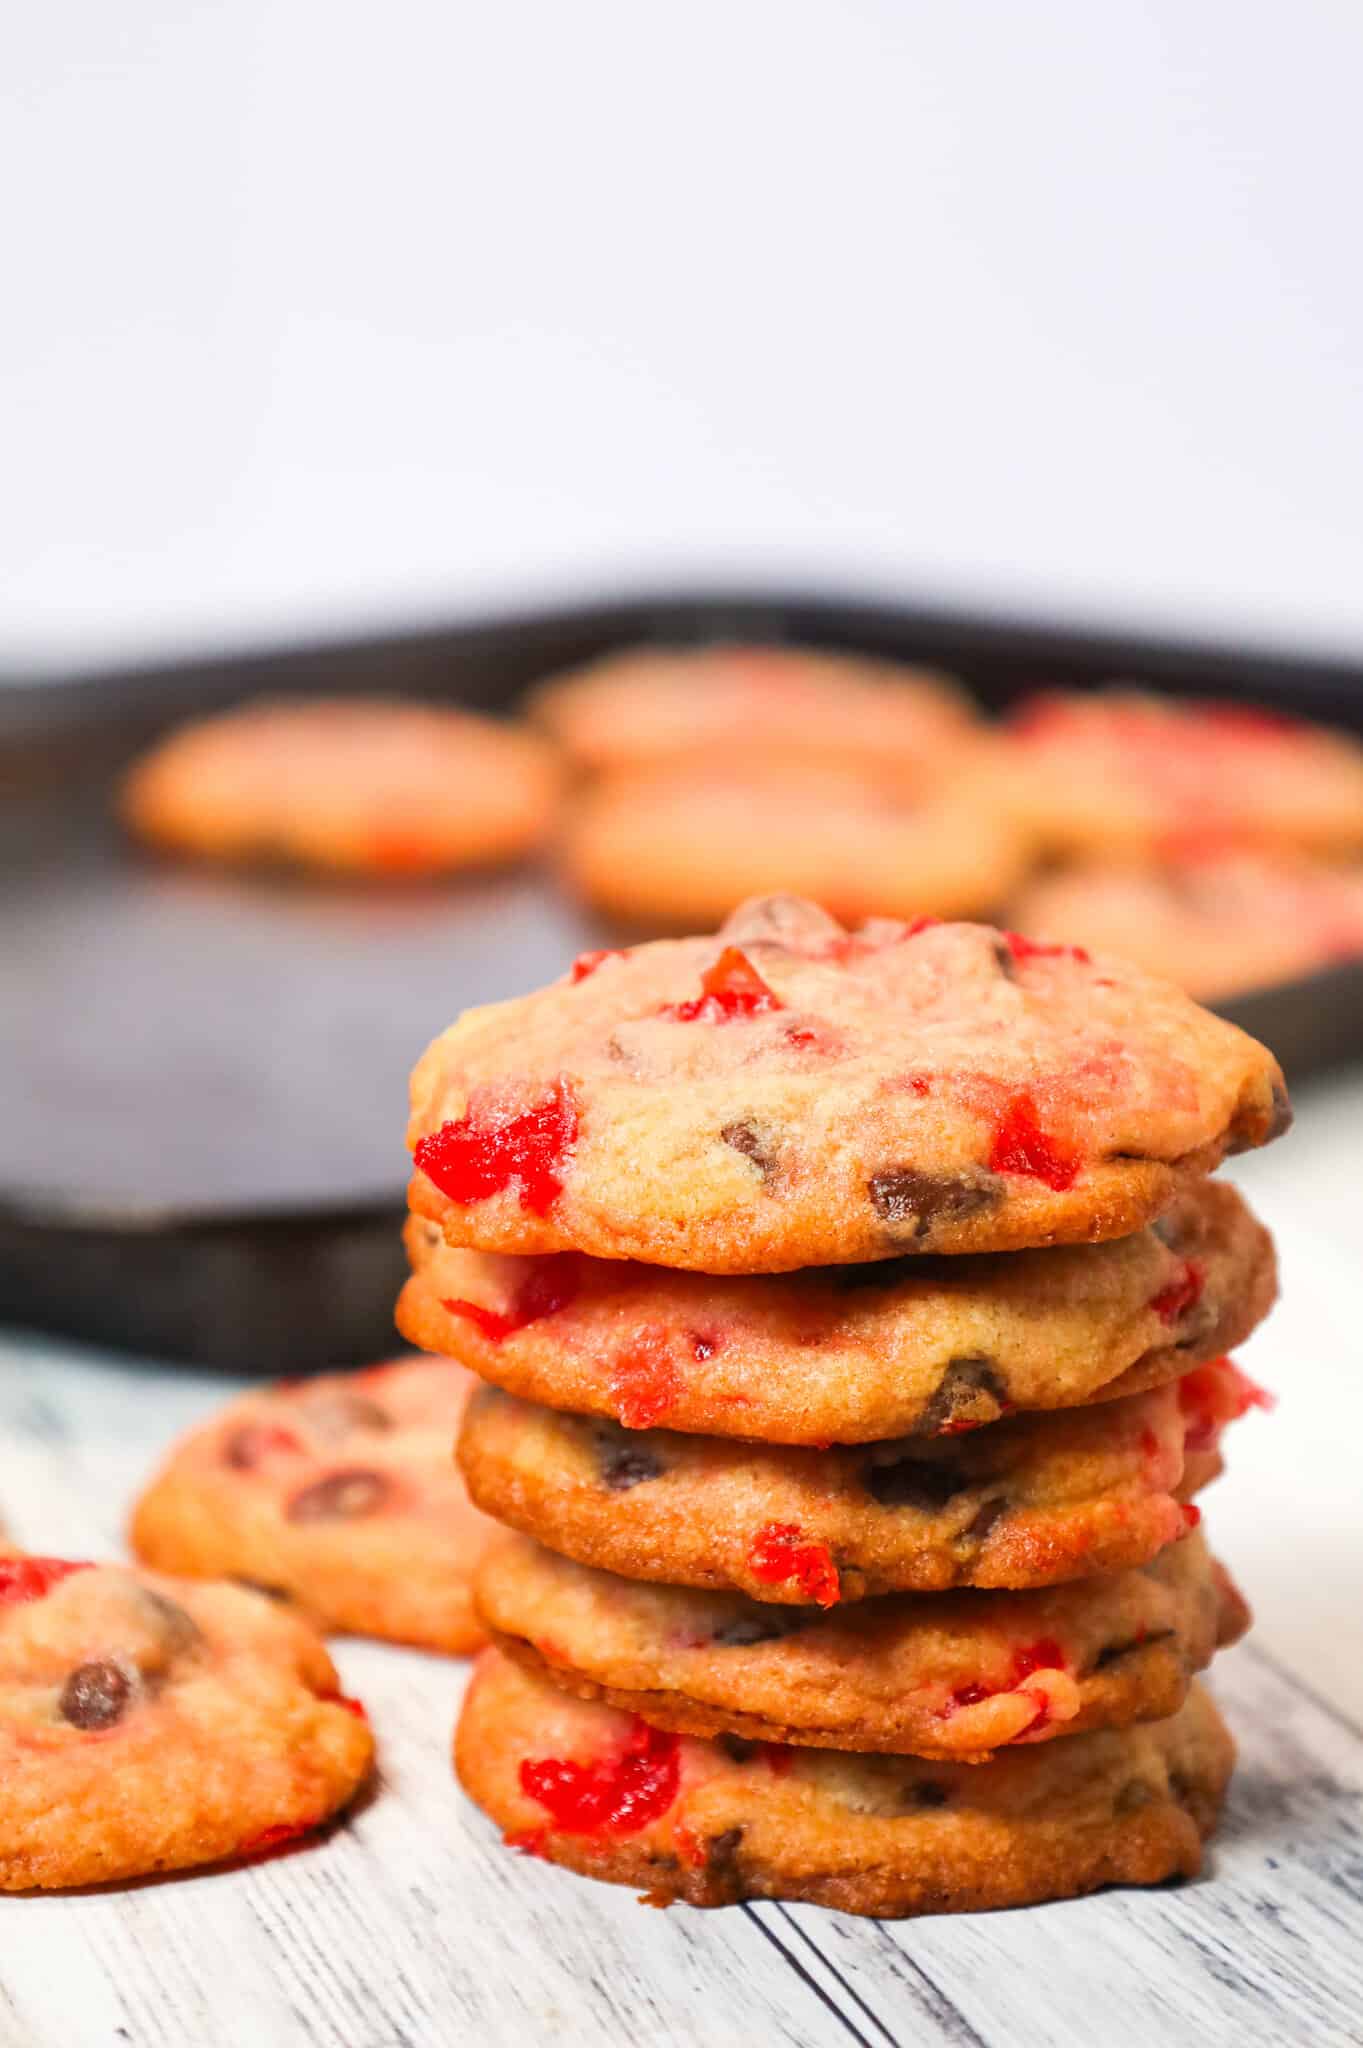 Cherry Chocolate Chip Cookies are delicious chewy chocolate chip cookies loaded with chopped maraschino cherries.